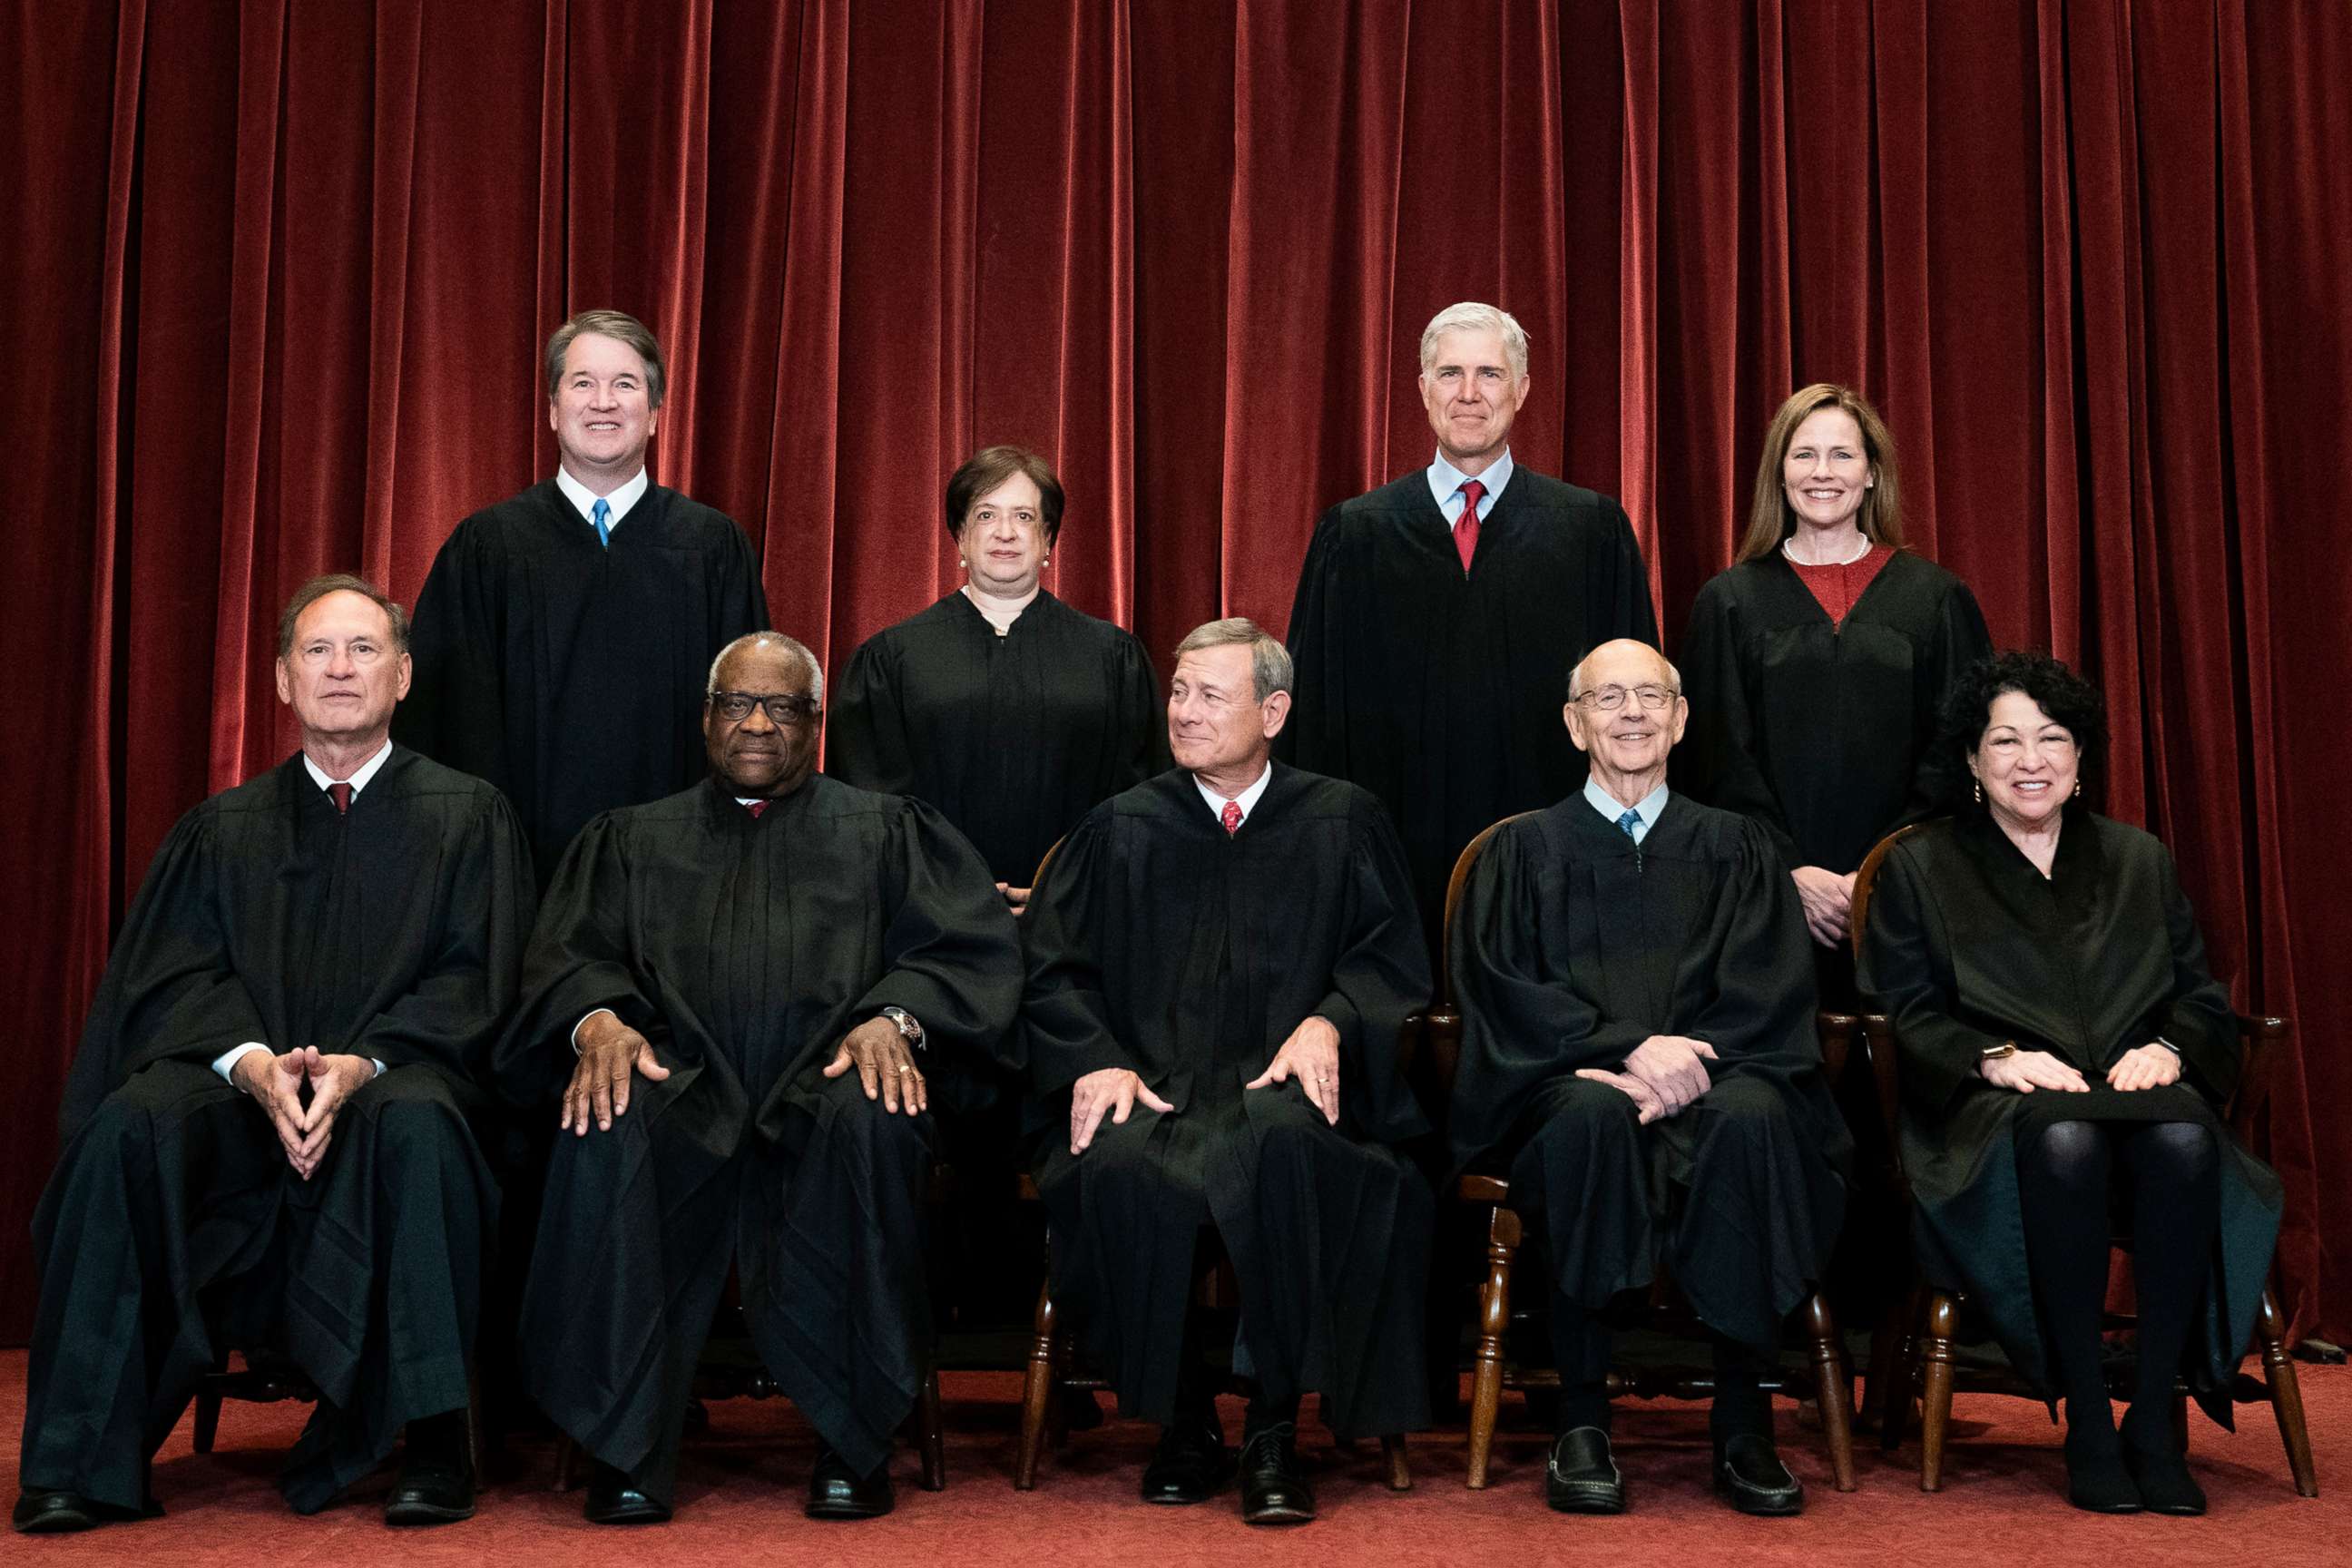 PHOTO: Members of the Supreme Court pose for a group photo at the Supreme Court in Washington, D.C., April 23, 2021.